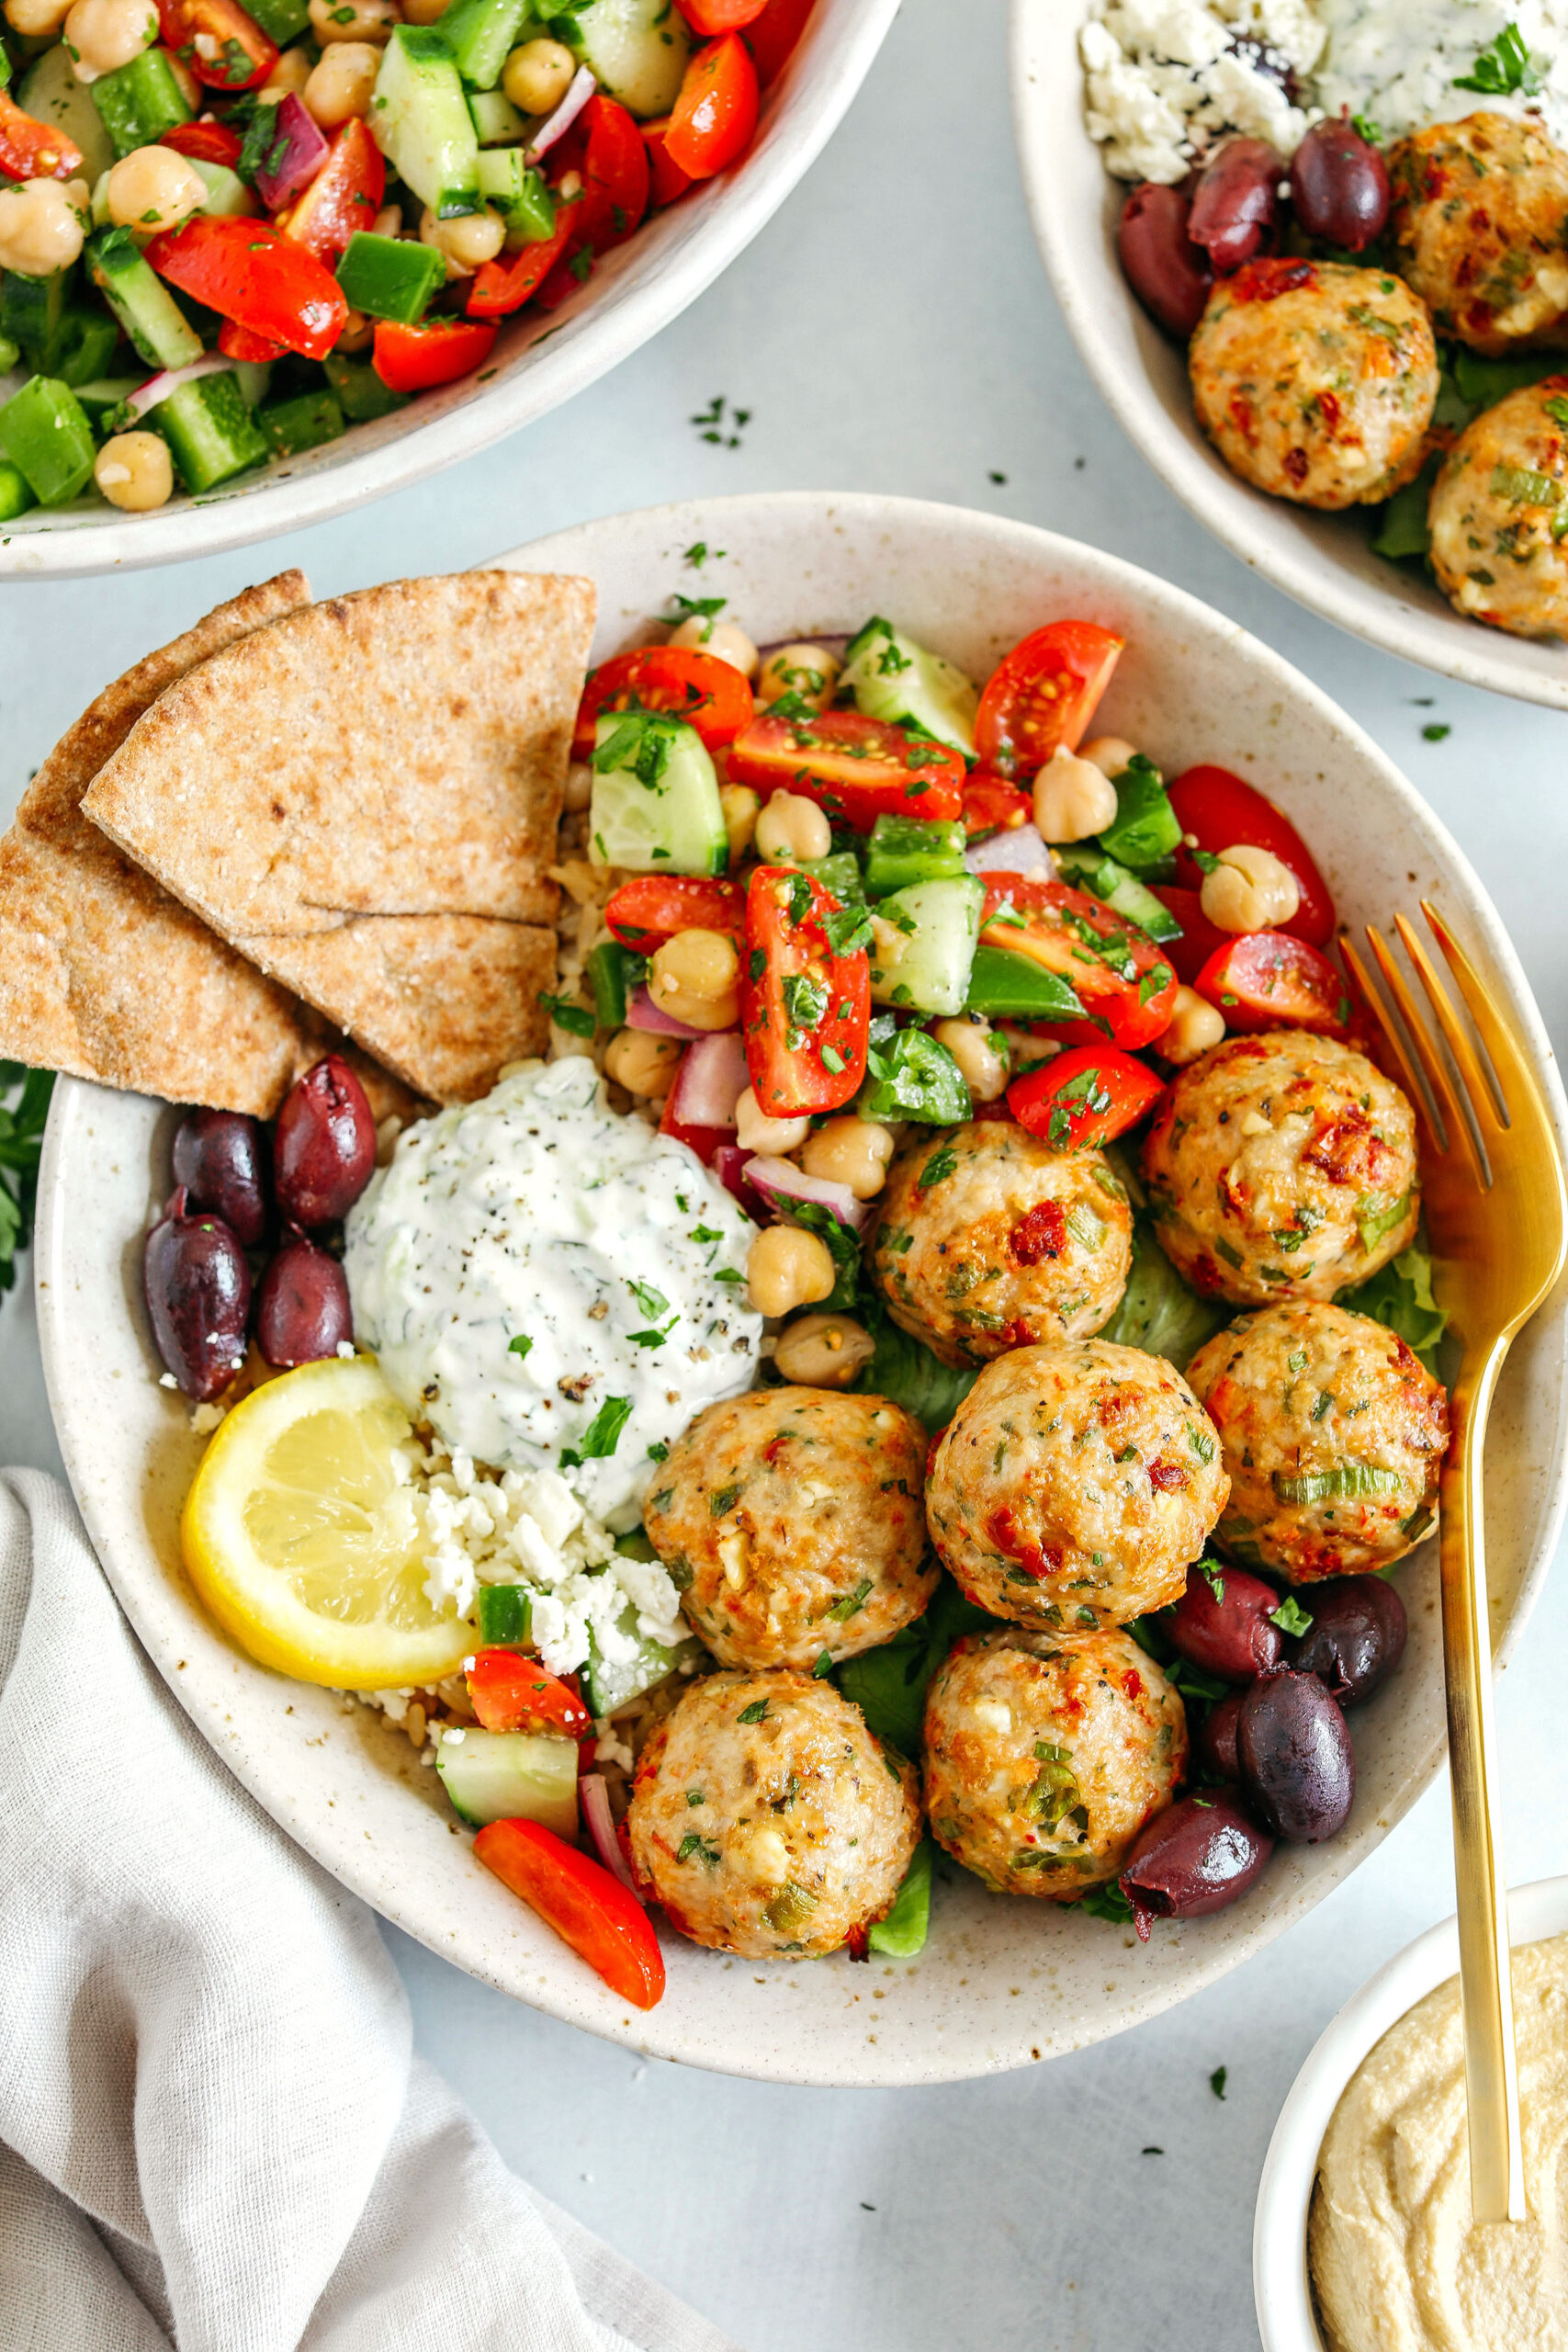 The most delicious Mediterranean Chicken Meatballs packed with flavor and easily made in under 30 minutes!  Serve with brown rice, homemade tzatziki sauce, sprinkle on some feta cheese, or pair with a tomato and chickpea salad for a complete meal!